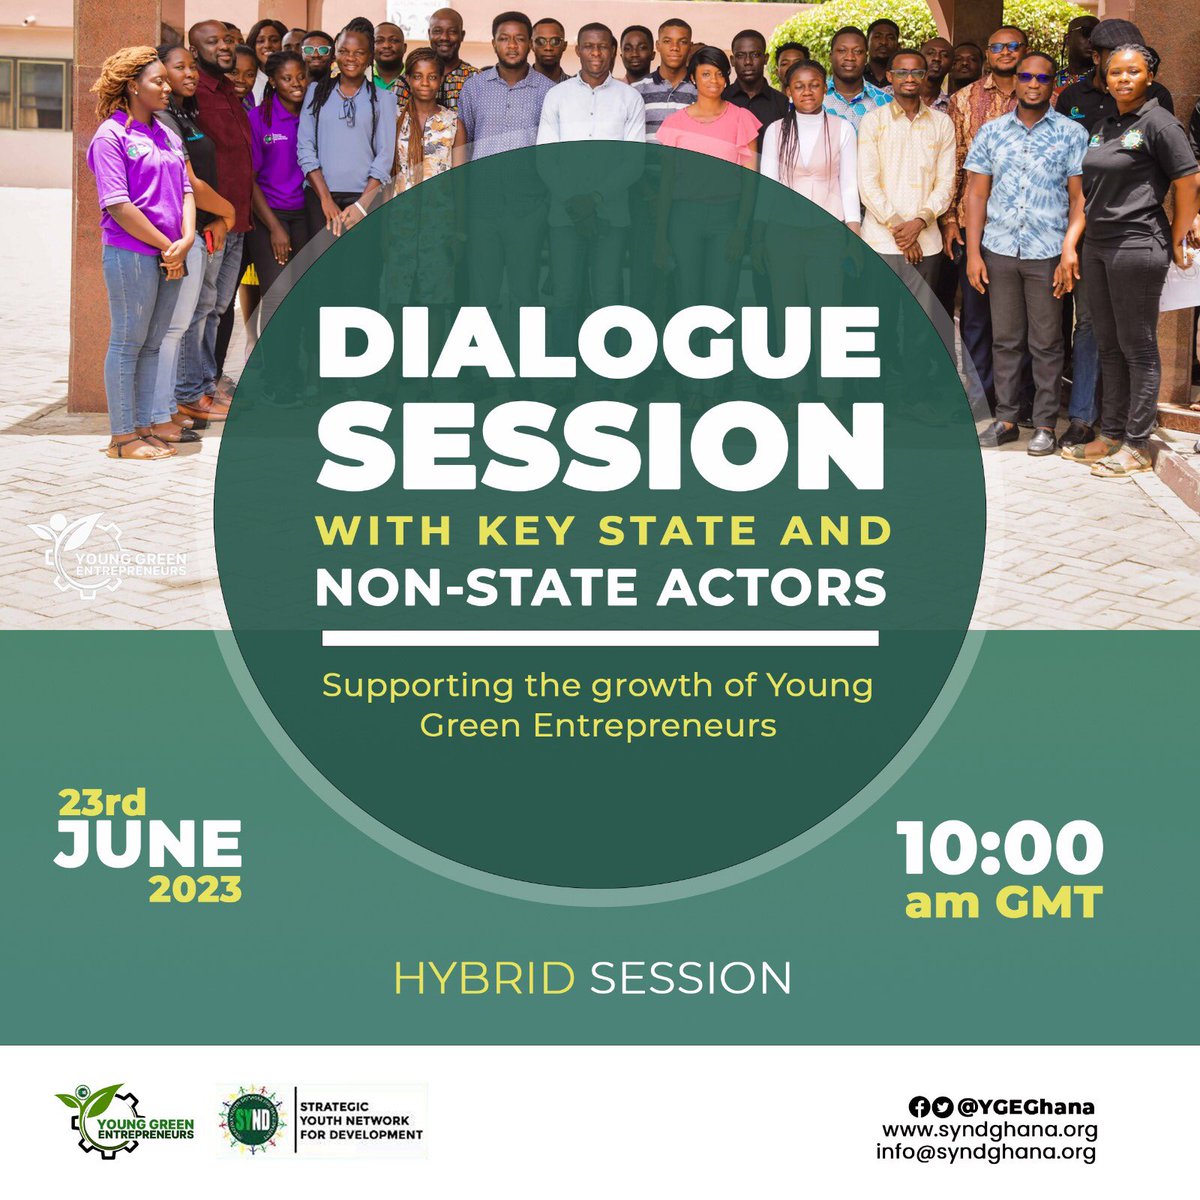 At this session, the state and Non-State actors will have the chance to share their expertise on entrepreneurship, shed light on governance challenges, and explore the exciting world of green entrepreneurship in Ghana.